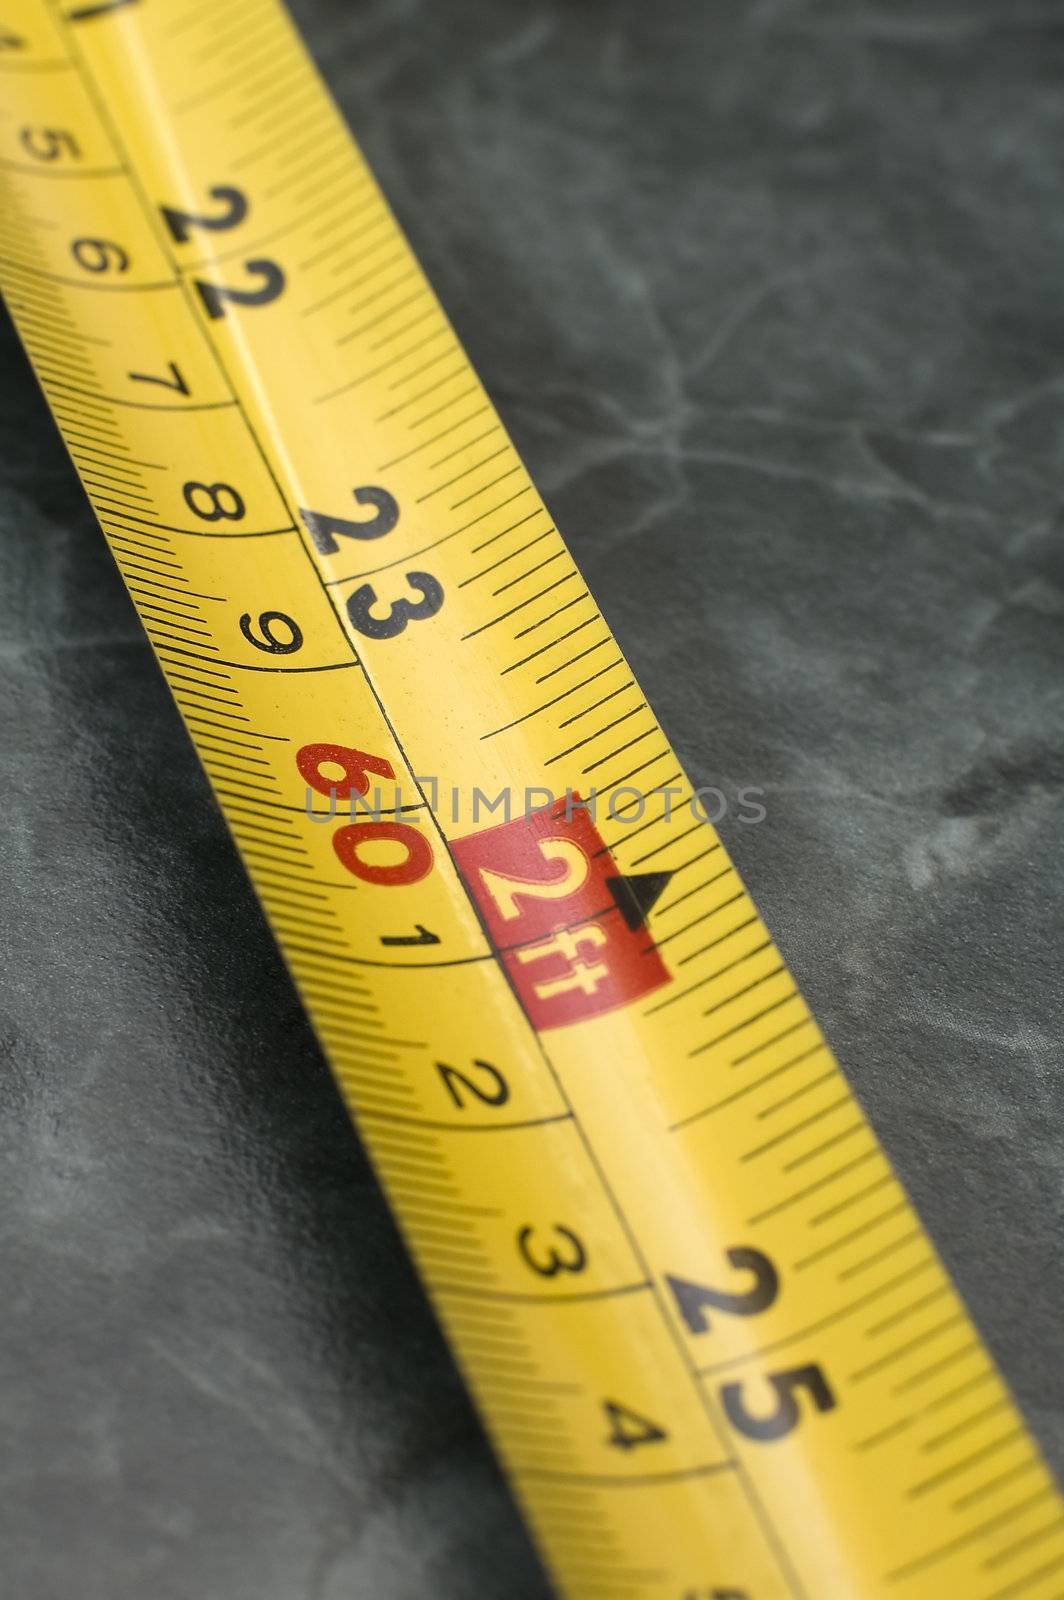 yellow Measuring Tape in centimeters and feets, distance blur, marble background